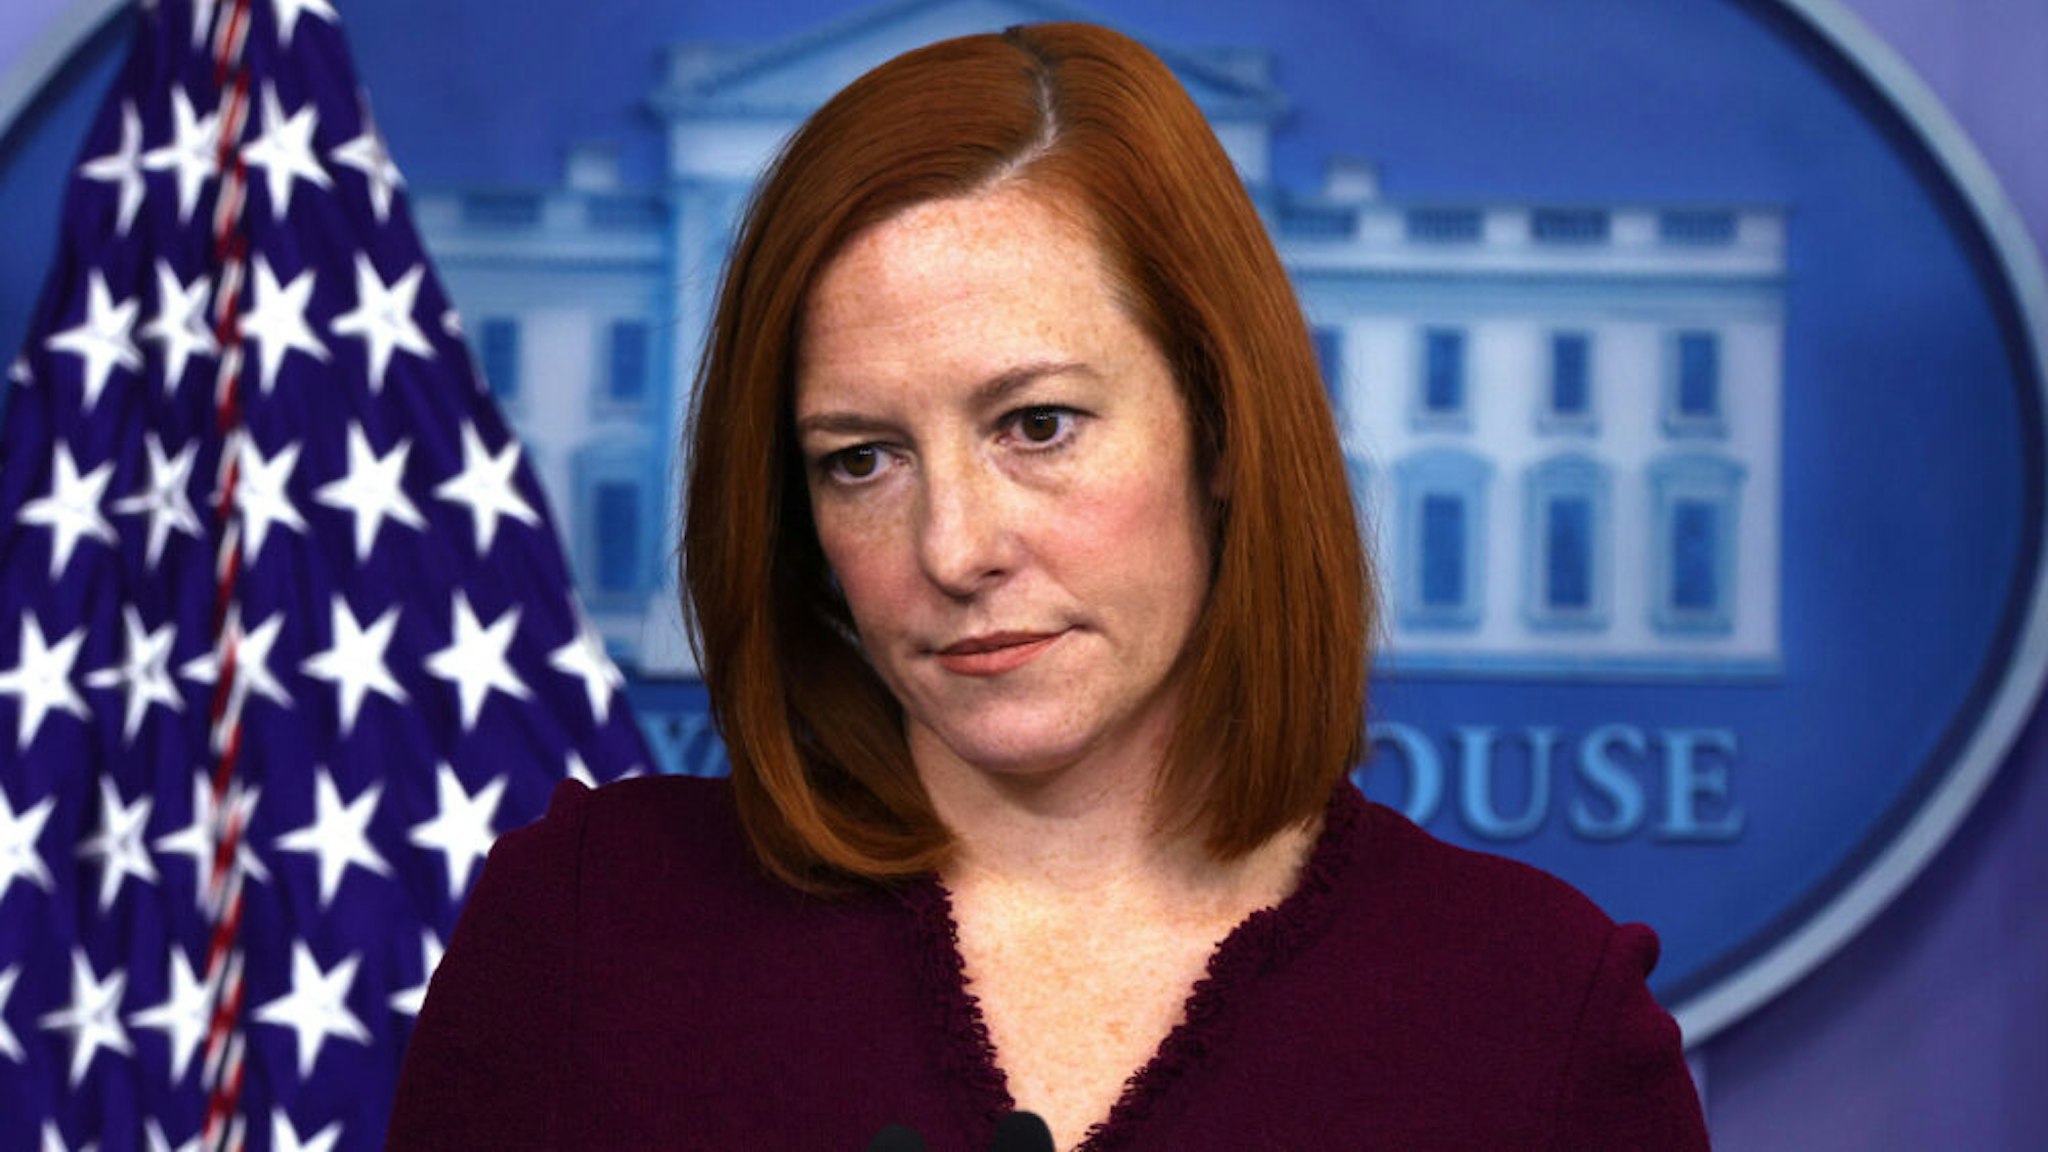 WASHINGTON, DC - FEBRUARY 09: White House Press Secretary Jen Psaki listens during a news briefing at the James Brady Press Briefing Room of the White House February 9, 2021 in Washington, DC. Psaki held a news briefing to answers questions from the members of the press.